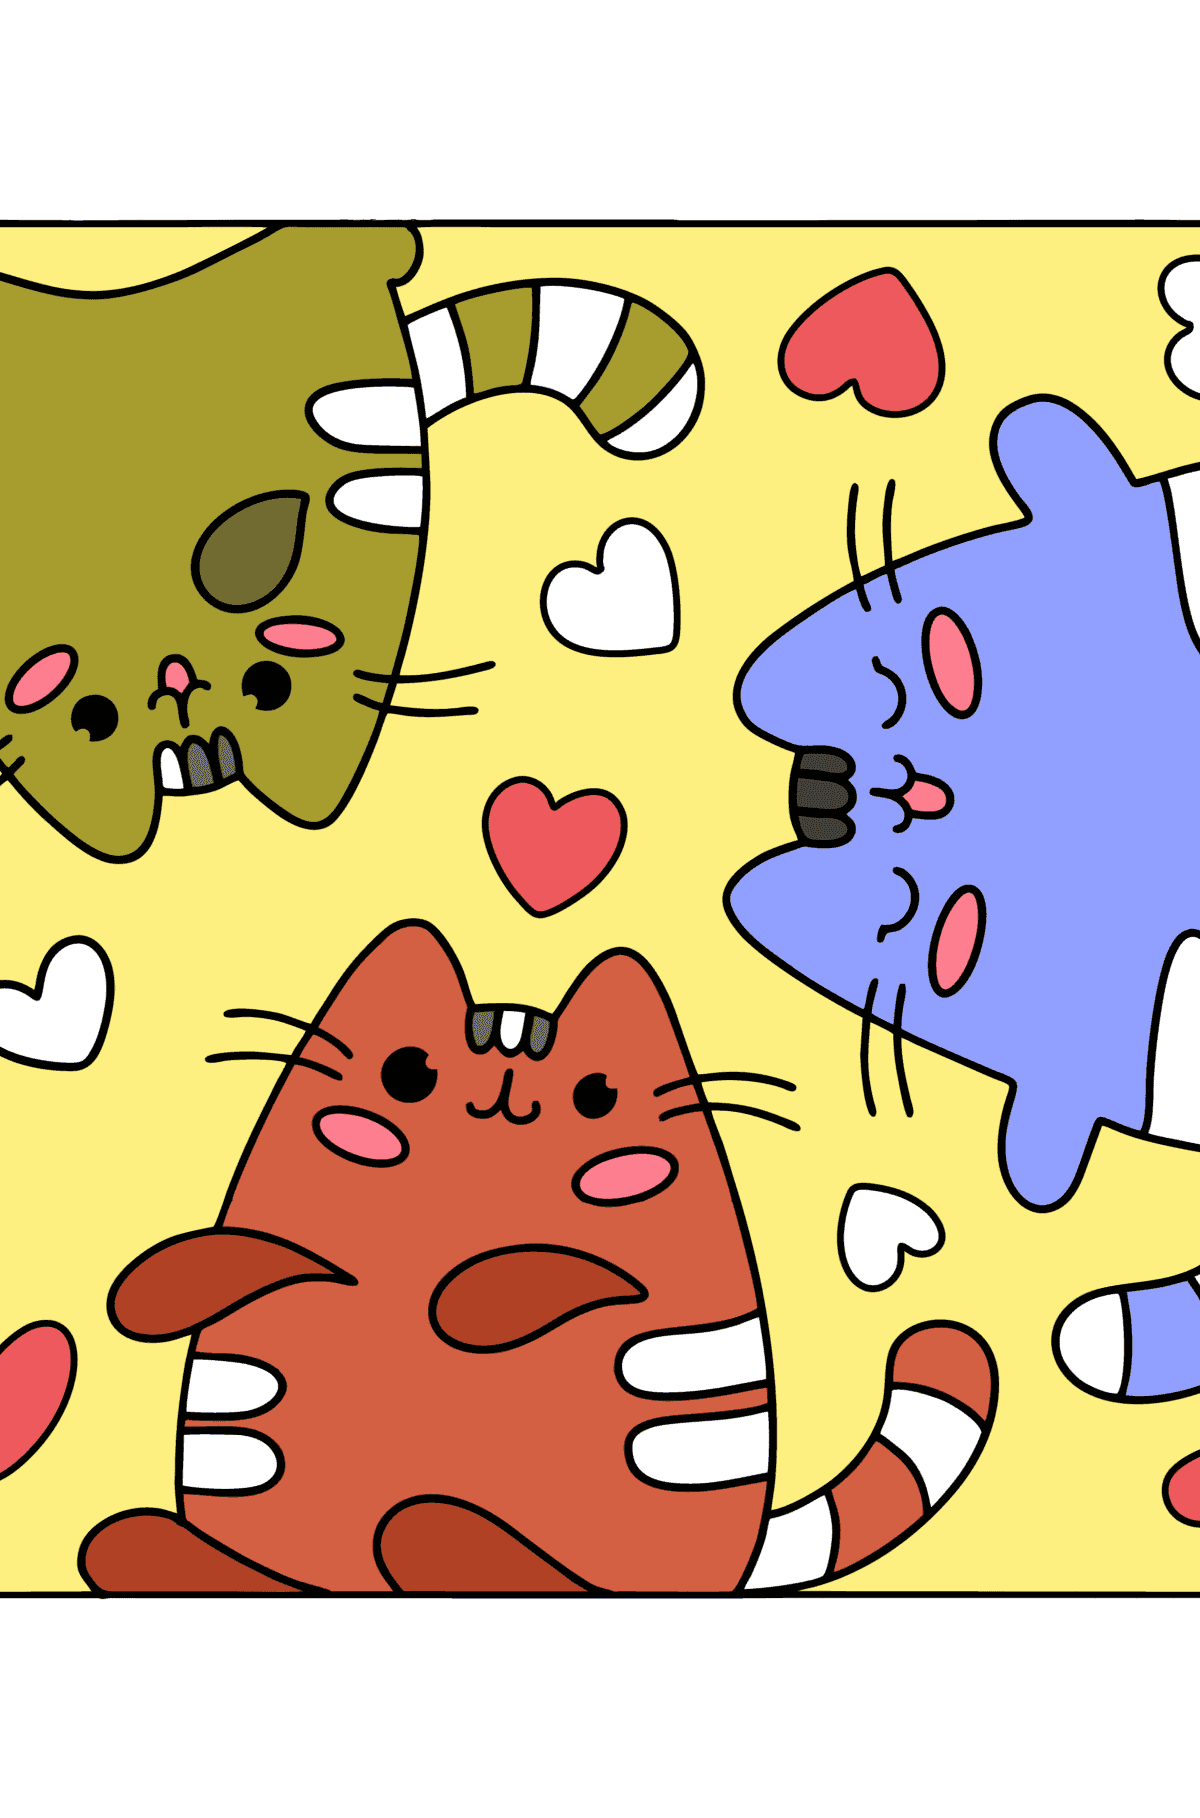 Pusheen cats сoloring page - Coloring Pages for Kids